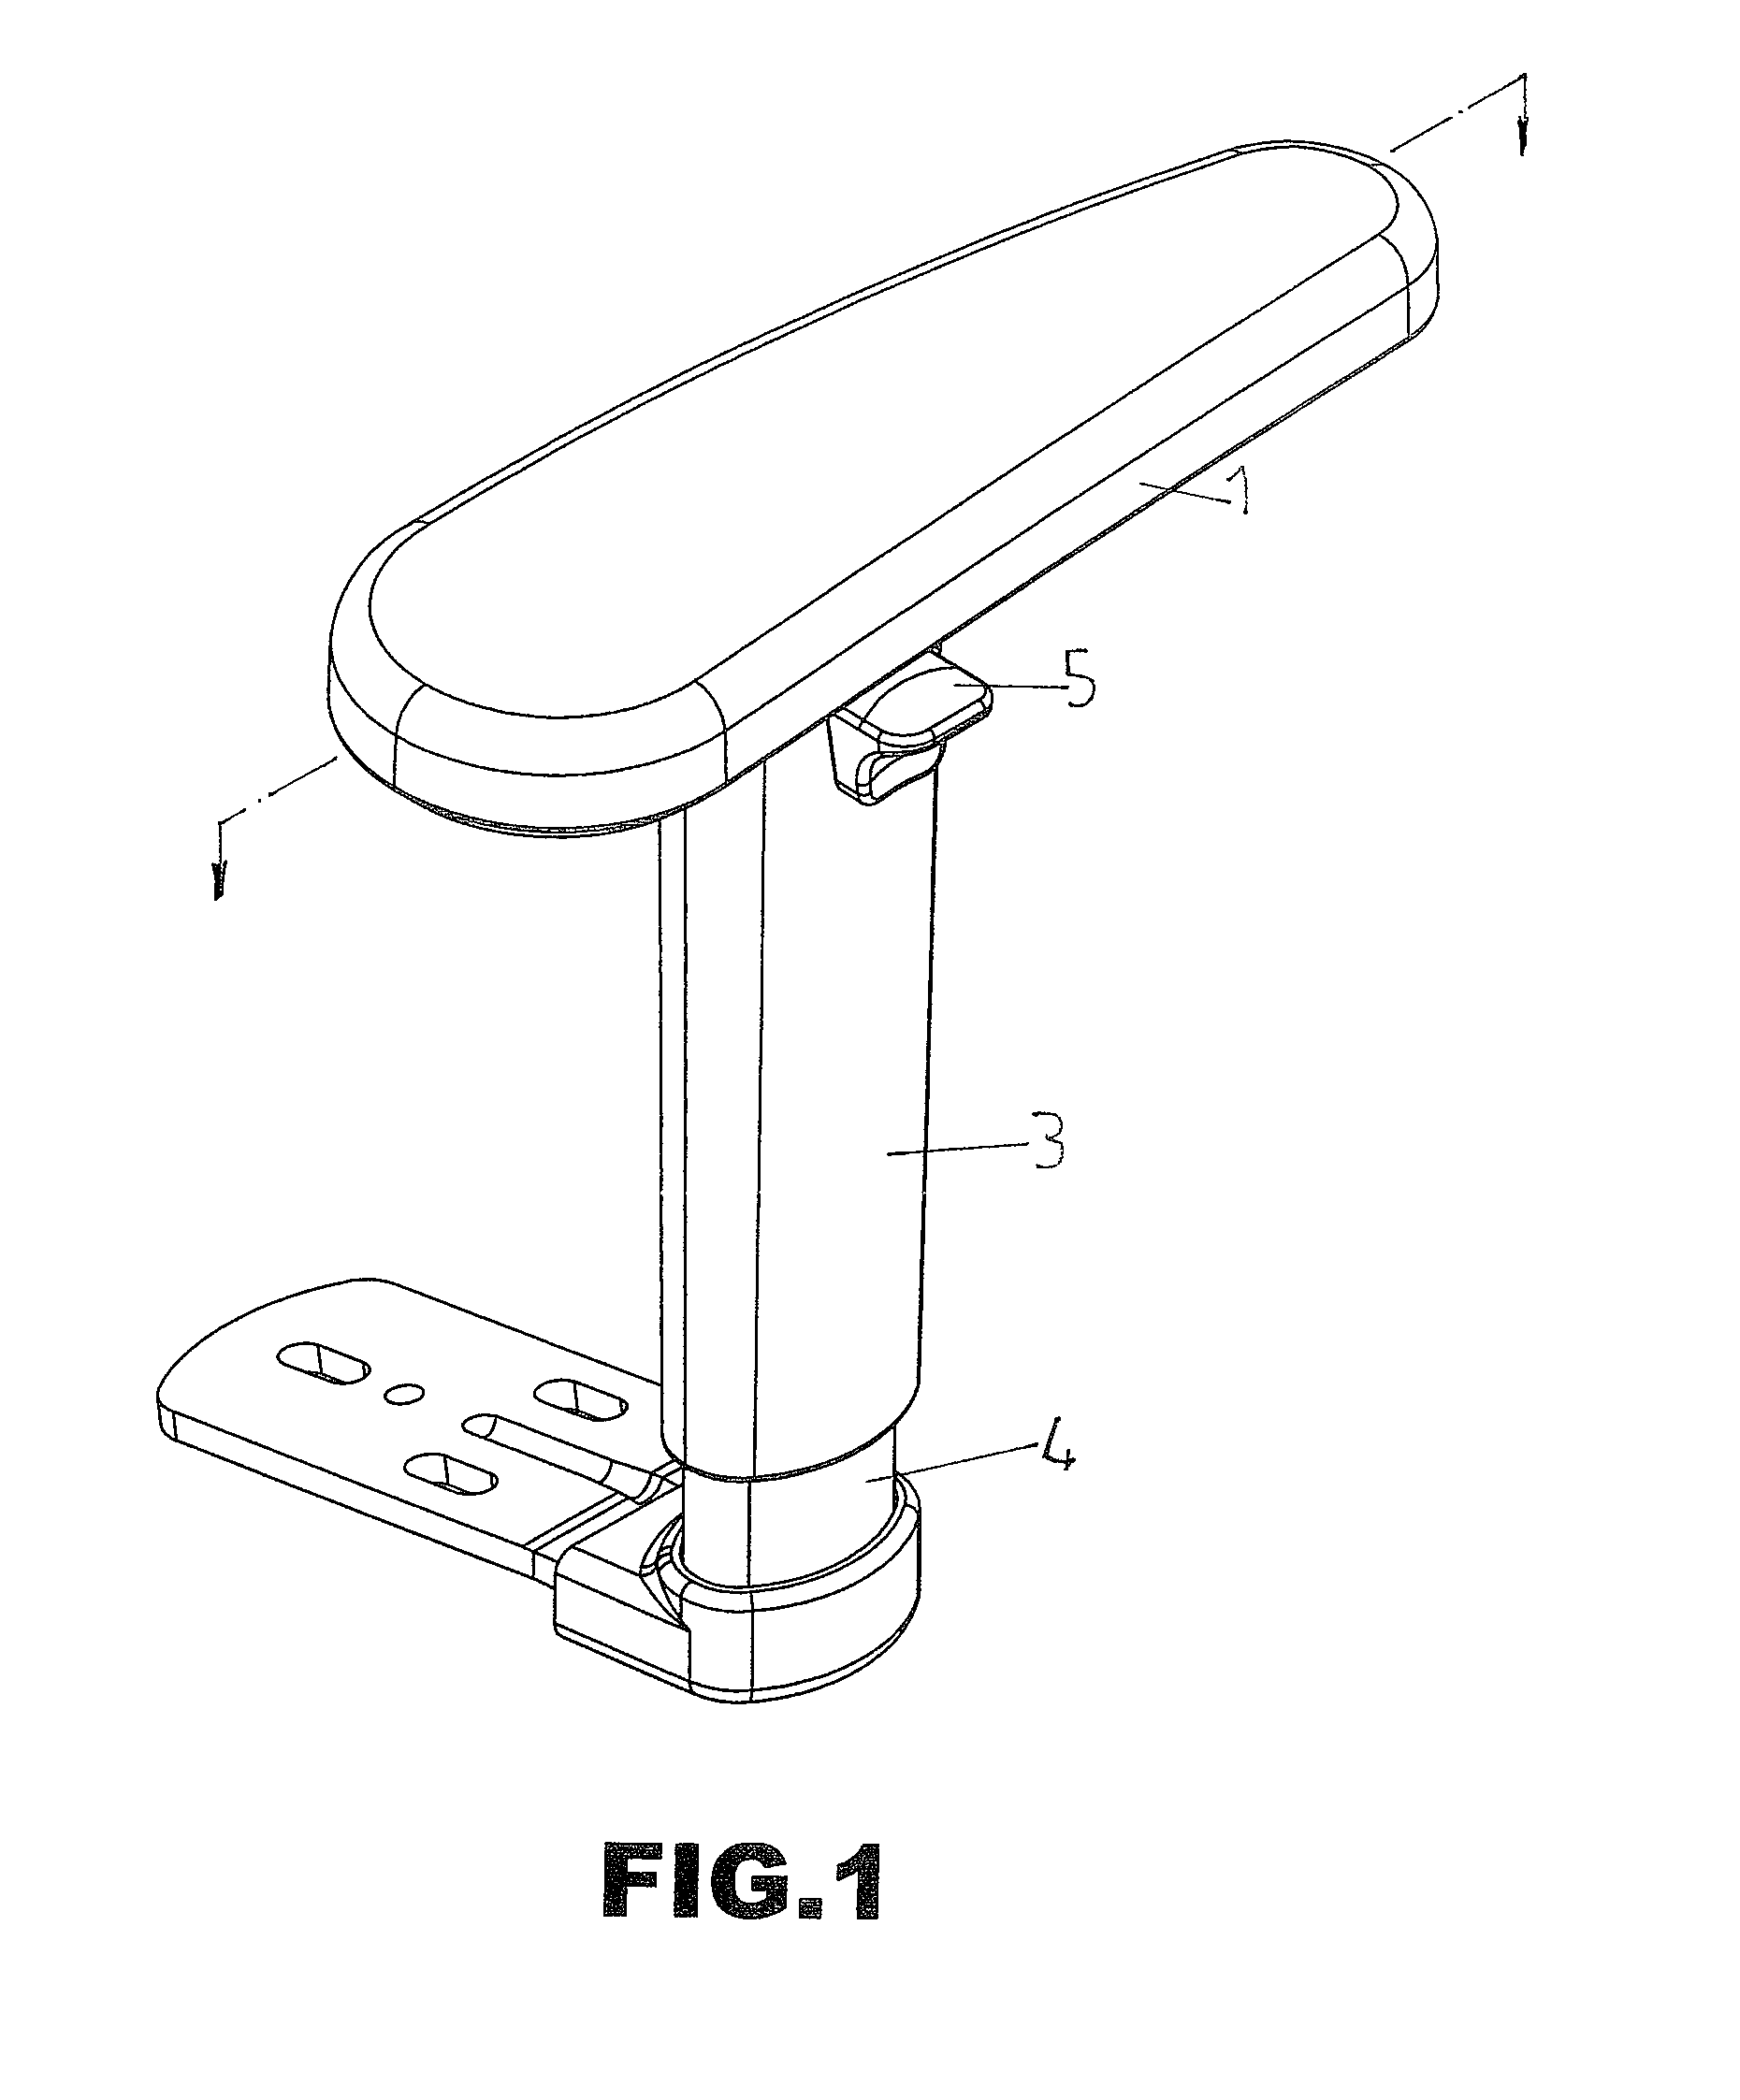 Chair armrest assembly having adjustable height